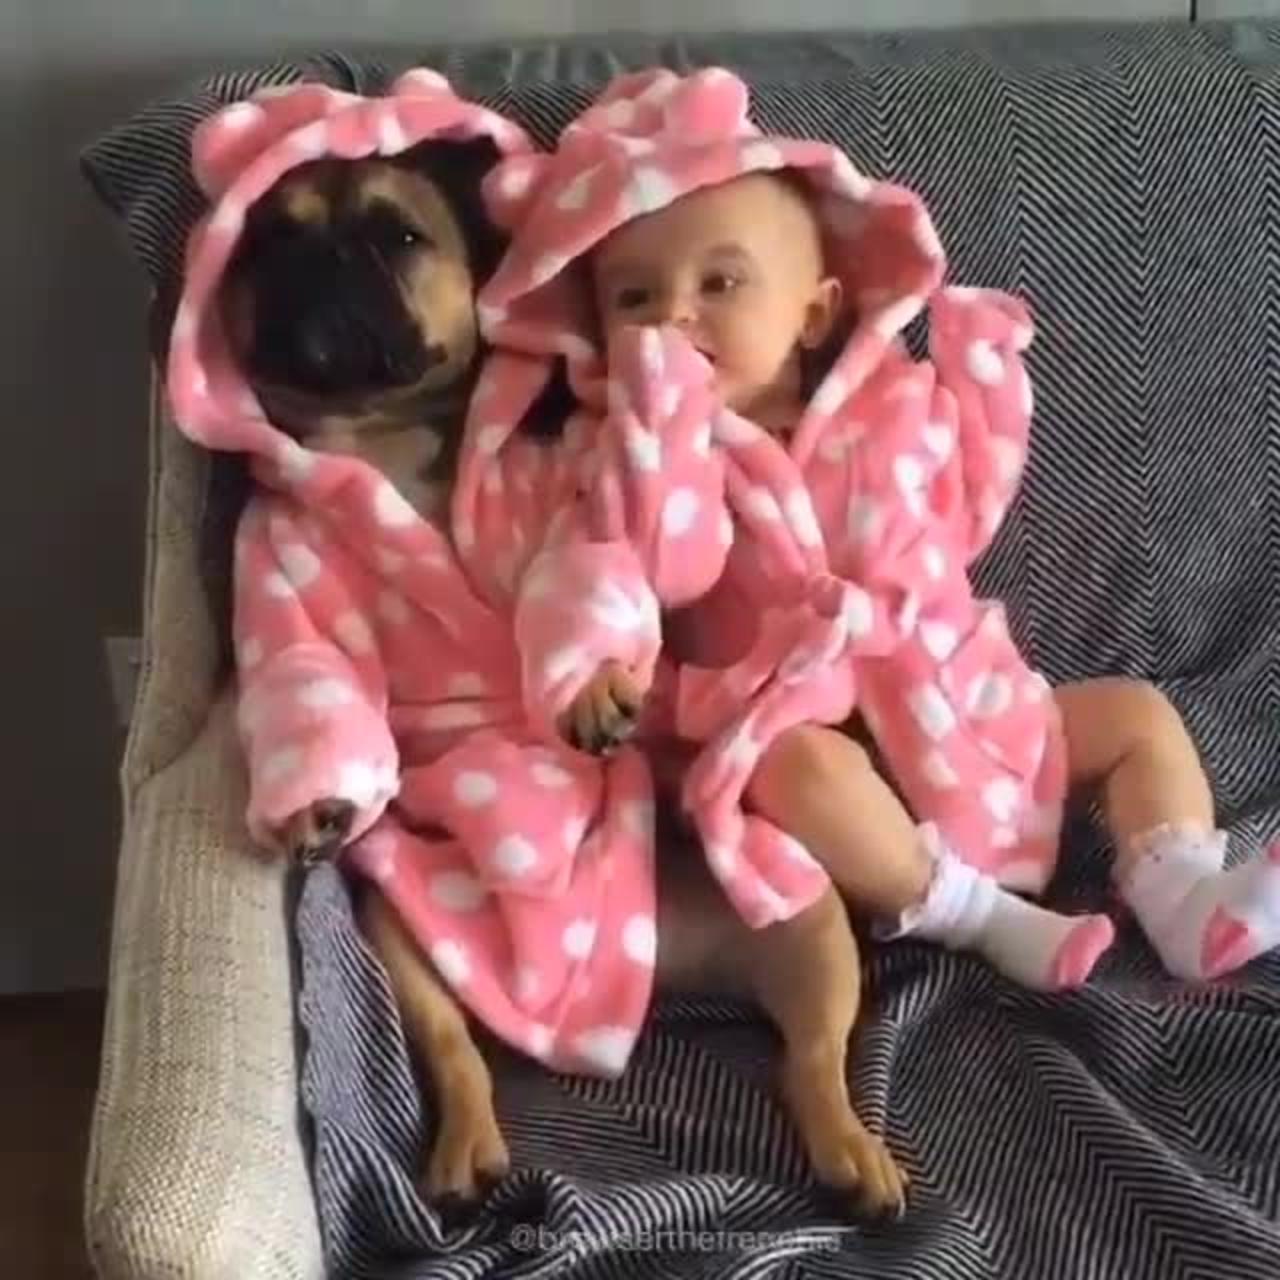 Cute baby dress up with dog